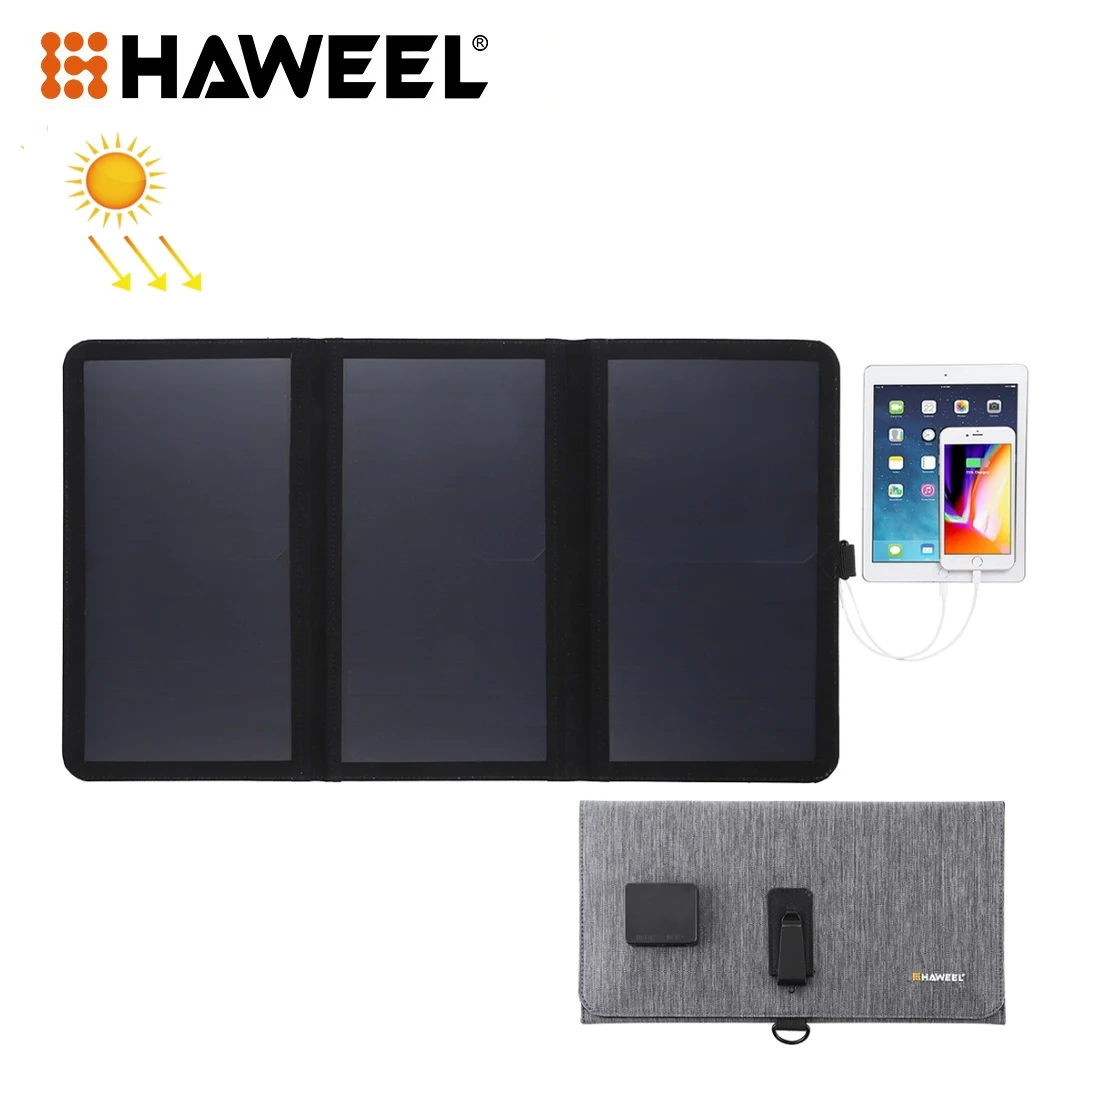 

HAWEEL 14W/21W Ultrathin 2-3-Fold Foldable 5V / 2.2A/3A Solar Panel Charger with Dual USB Ports, Support QC3.0 and AFC